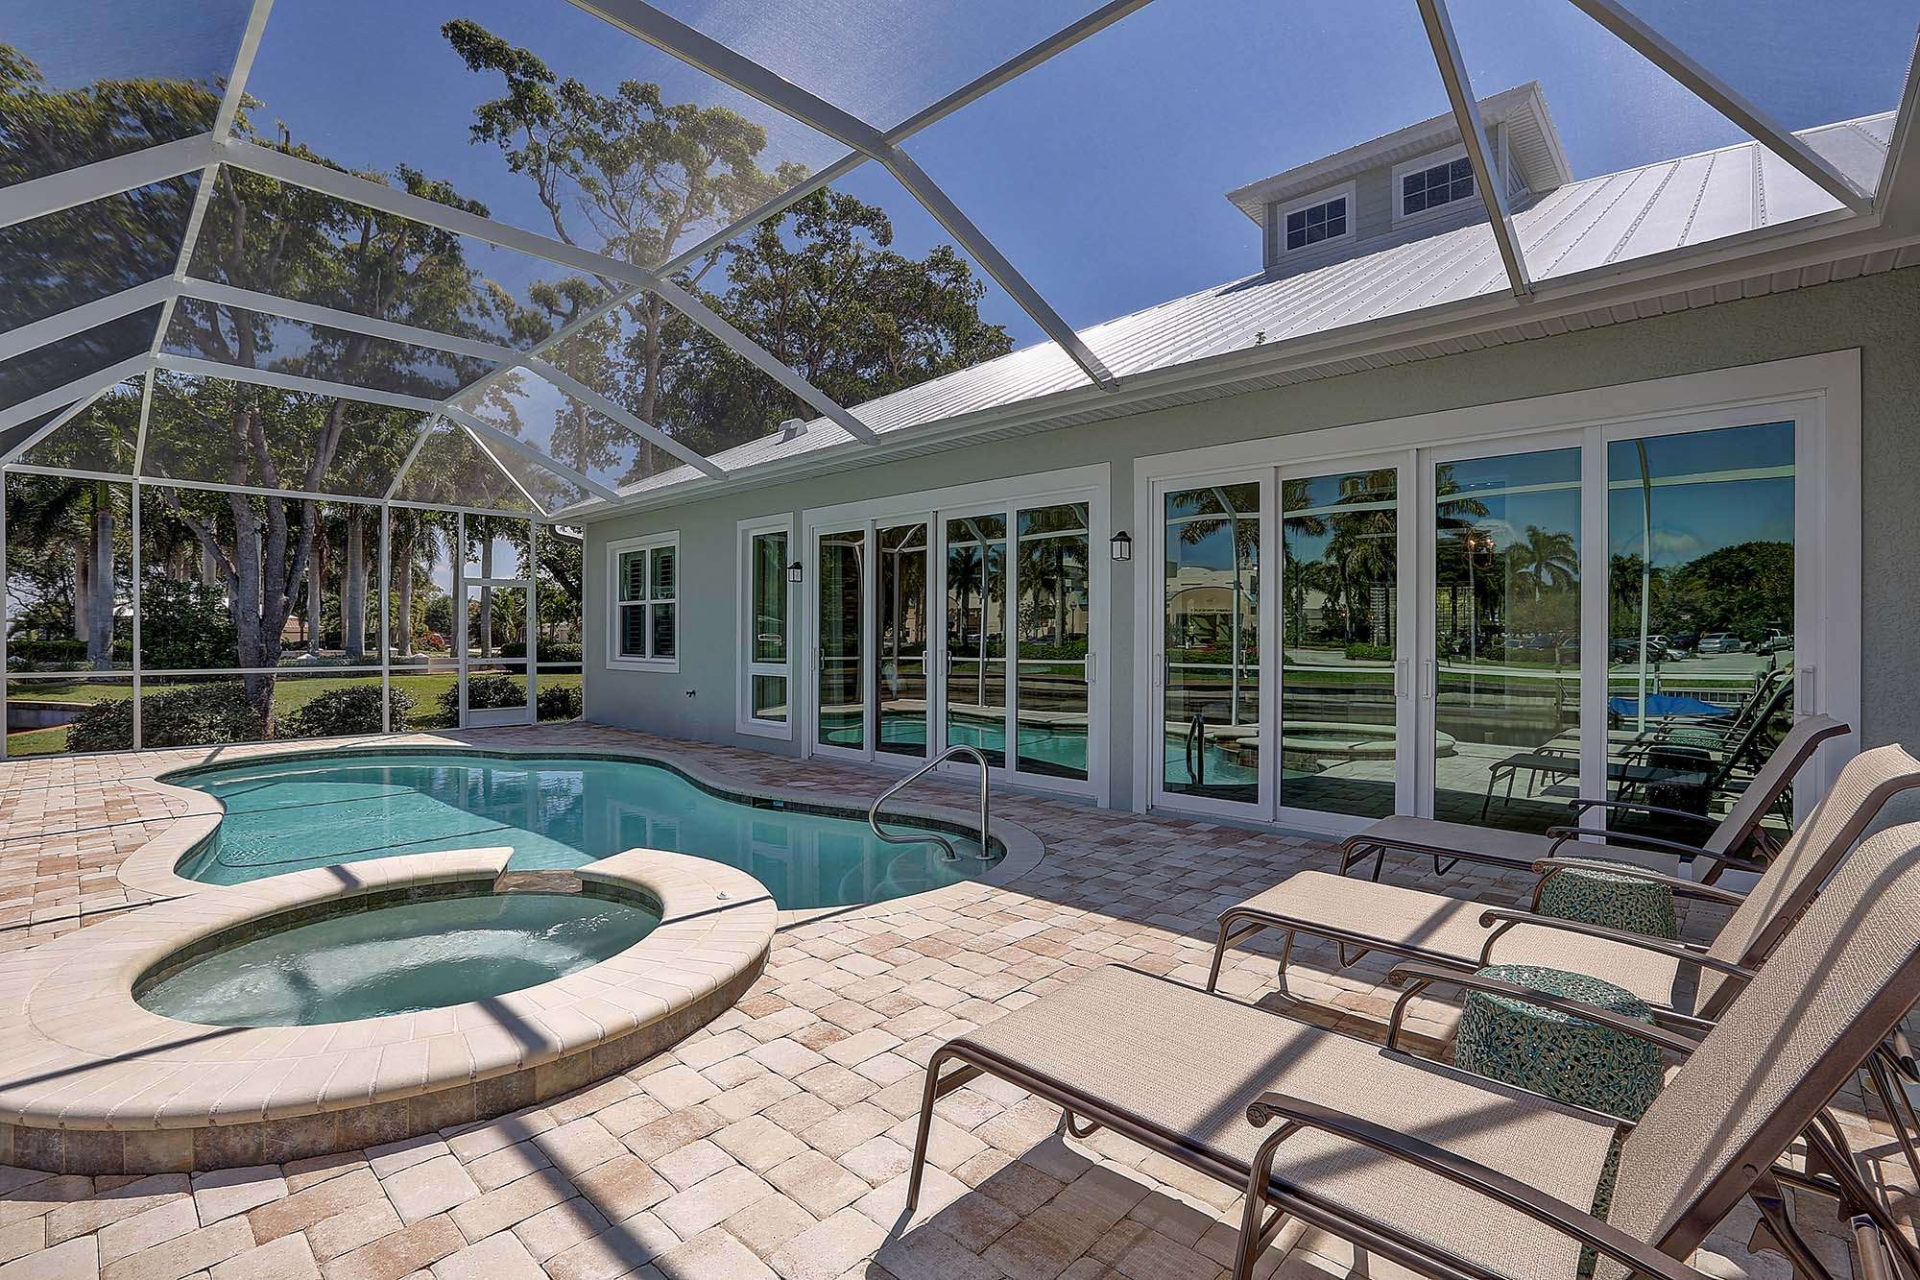 The pool in the Boca Grande model home at Shell Point Retirement Community